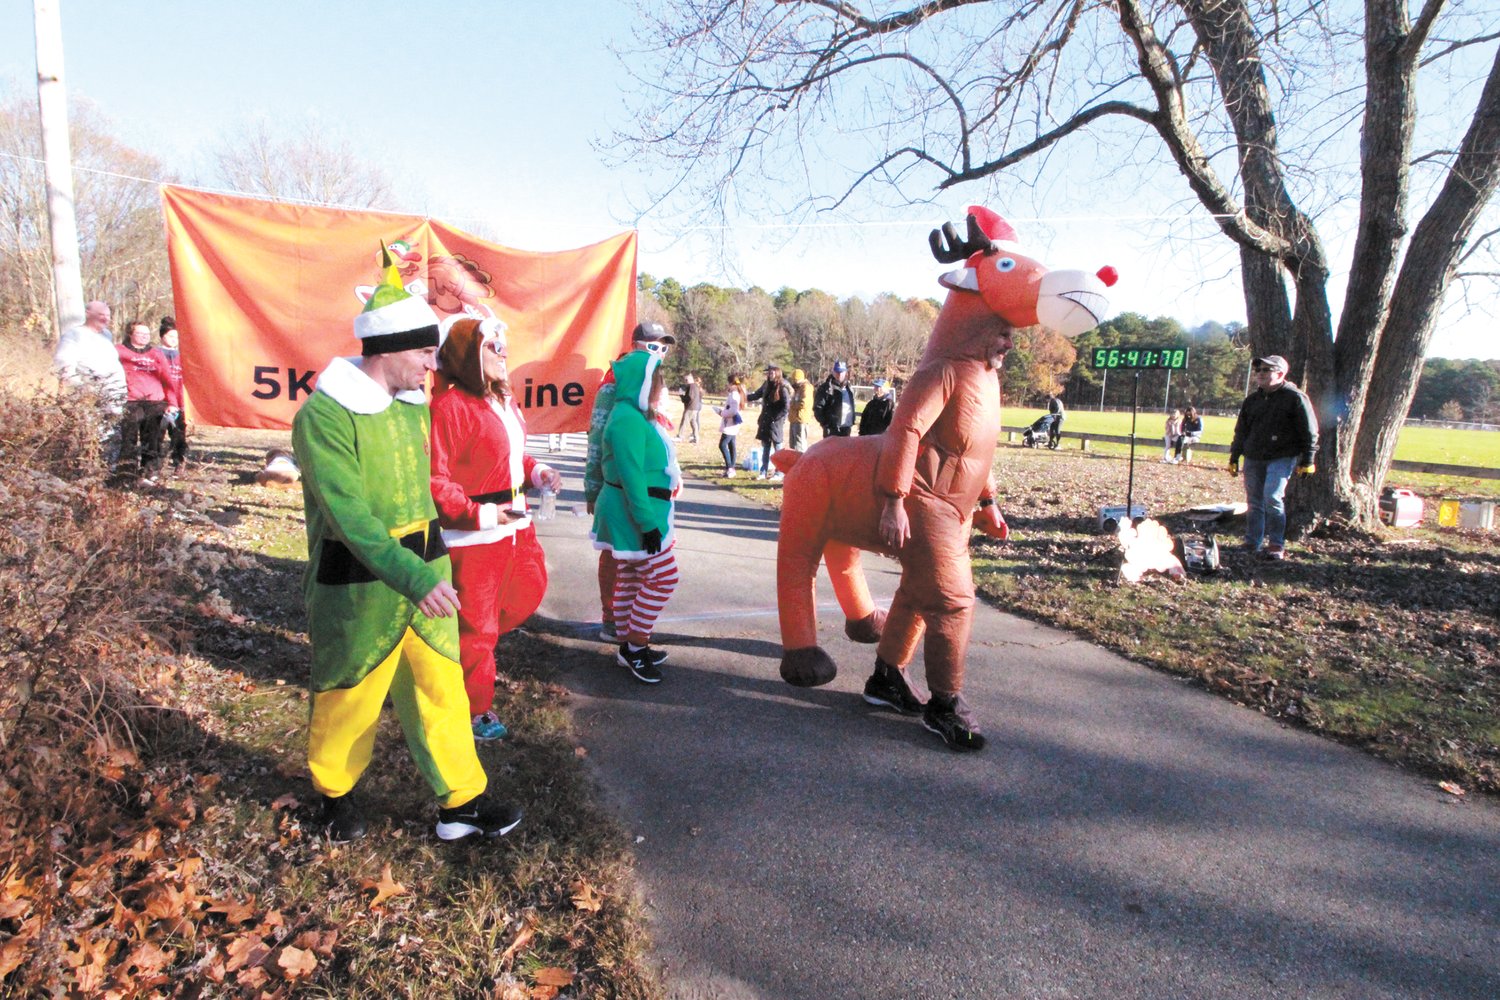 SANTA’S FRIENDS: Even Rudolf joined in the finish line celebration of these trotters.